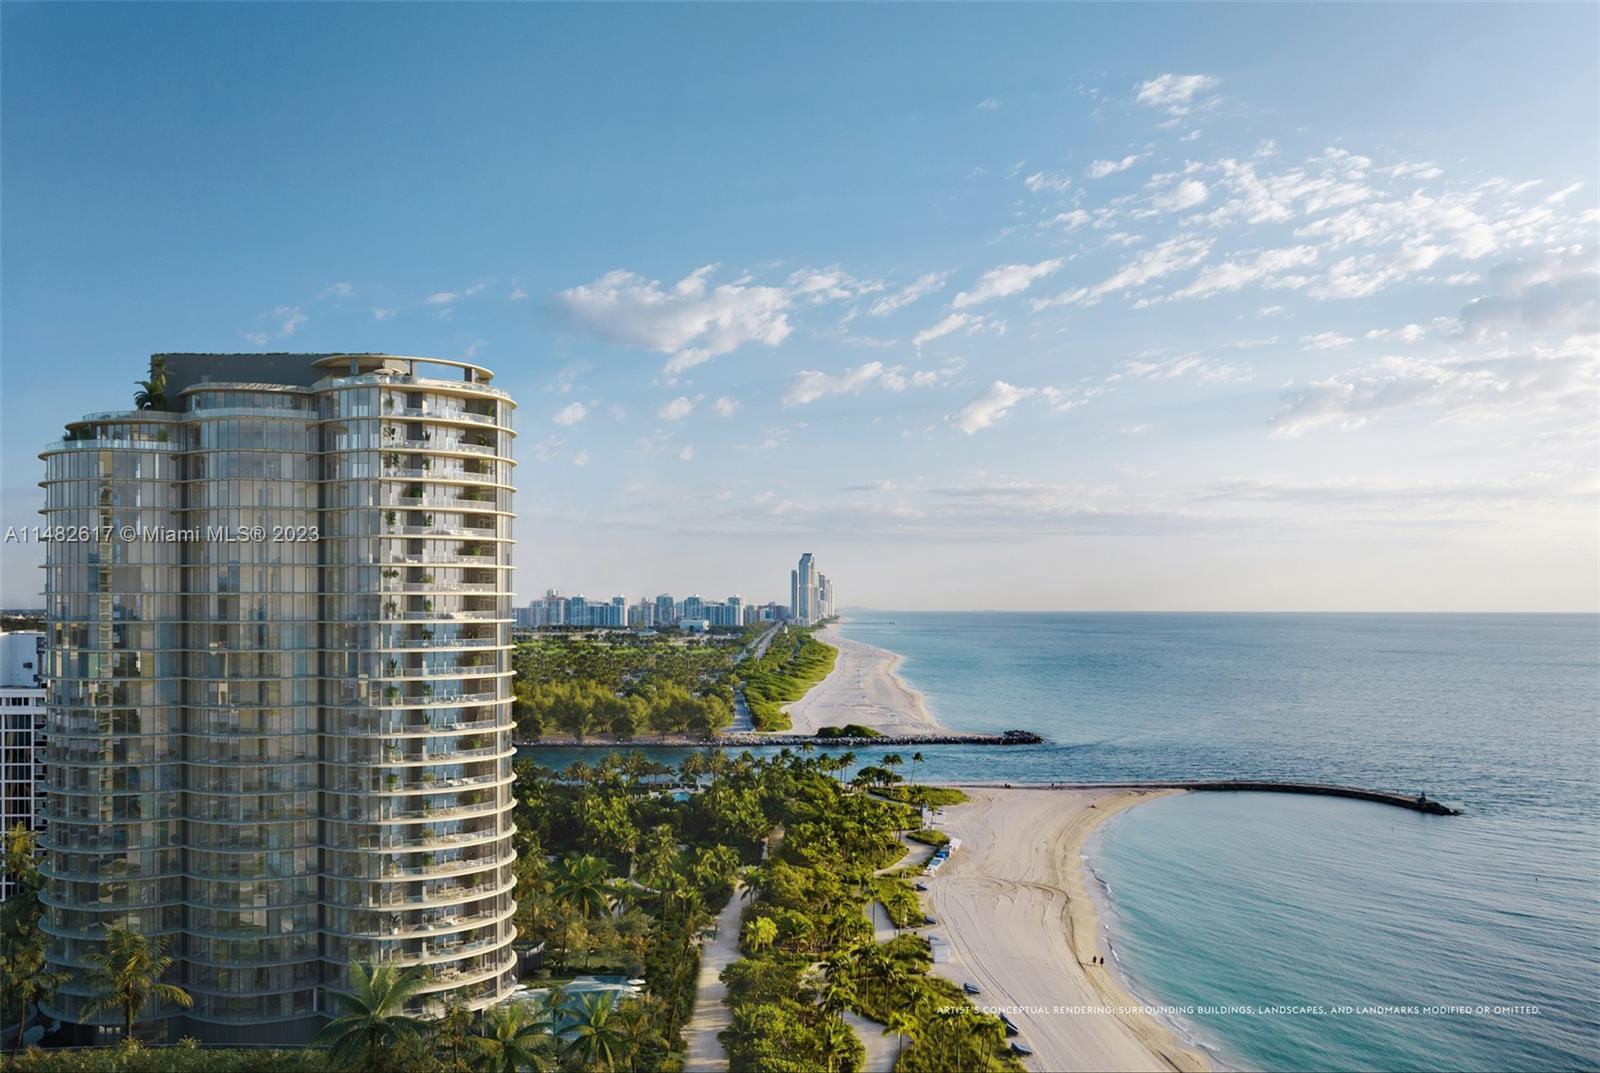 Designed by renowned architecture firm S.O.M., Rivage Bal Harbour is perfectly positioned on the mos